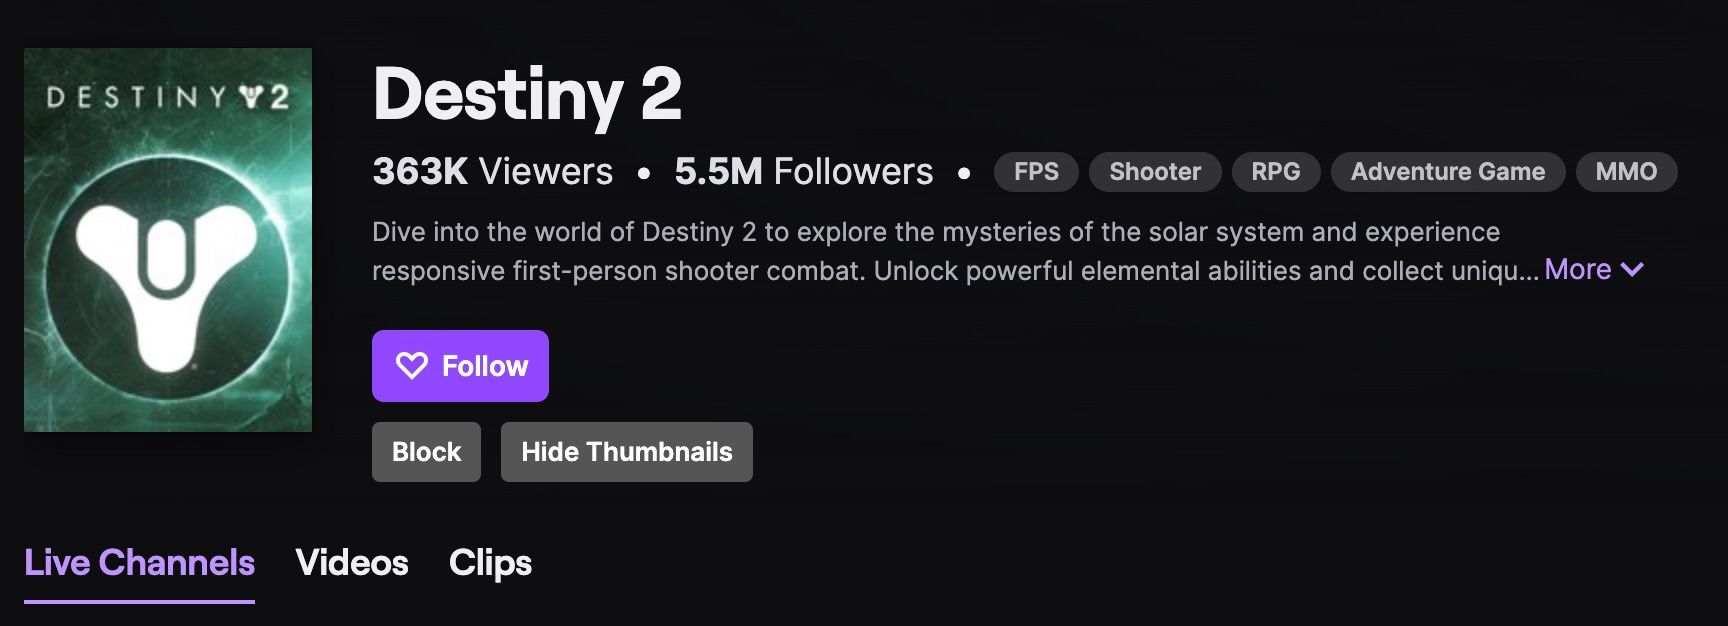 destiny 2 with over 360,000 viewers